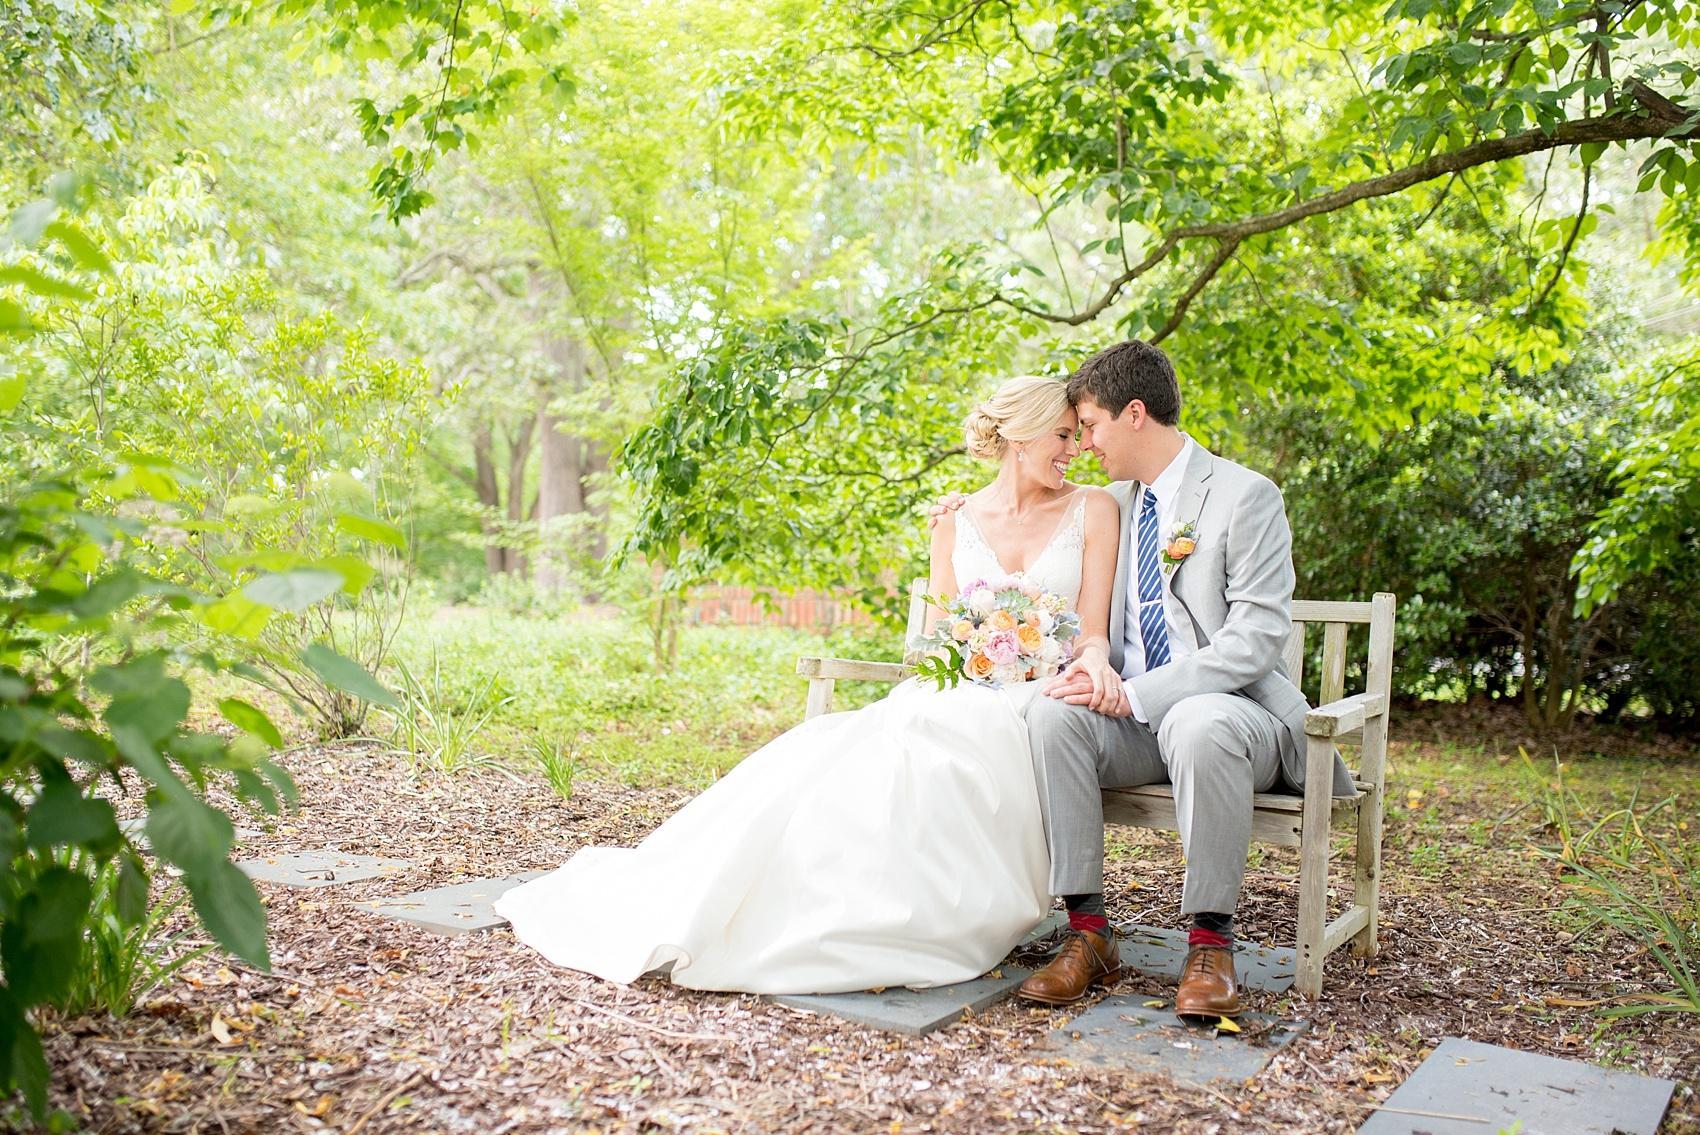 Mikkel Paige Photography pictures of a wedding in downtown Raleigh. Photo of the bride and groom on a bench in her family's garden.